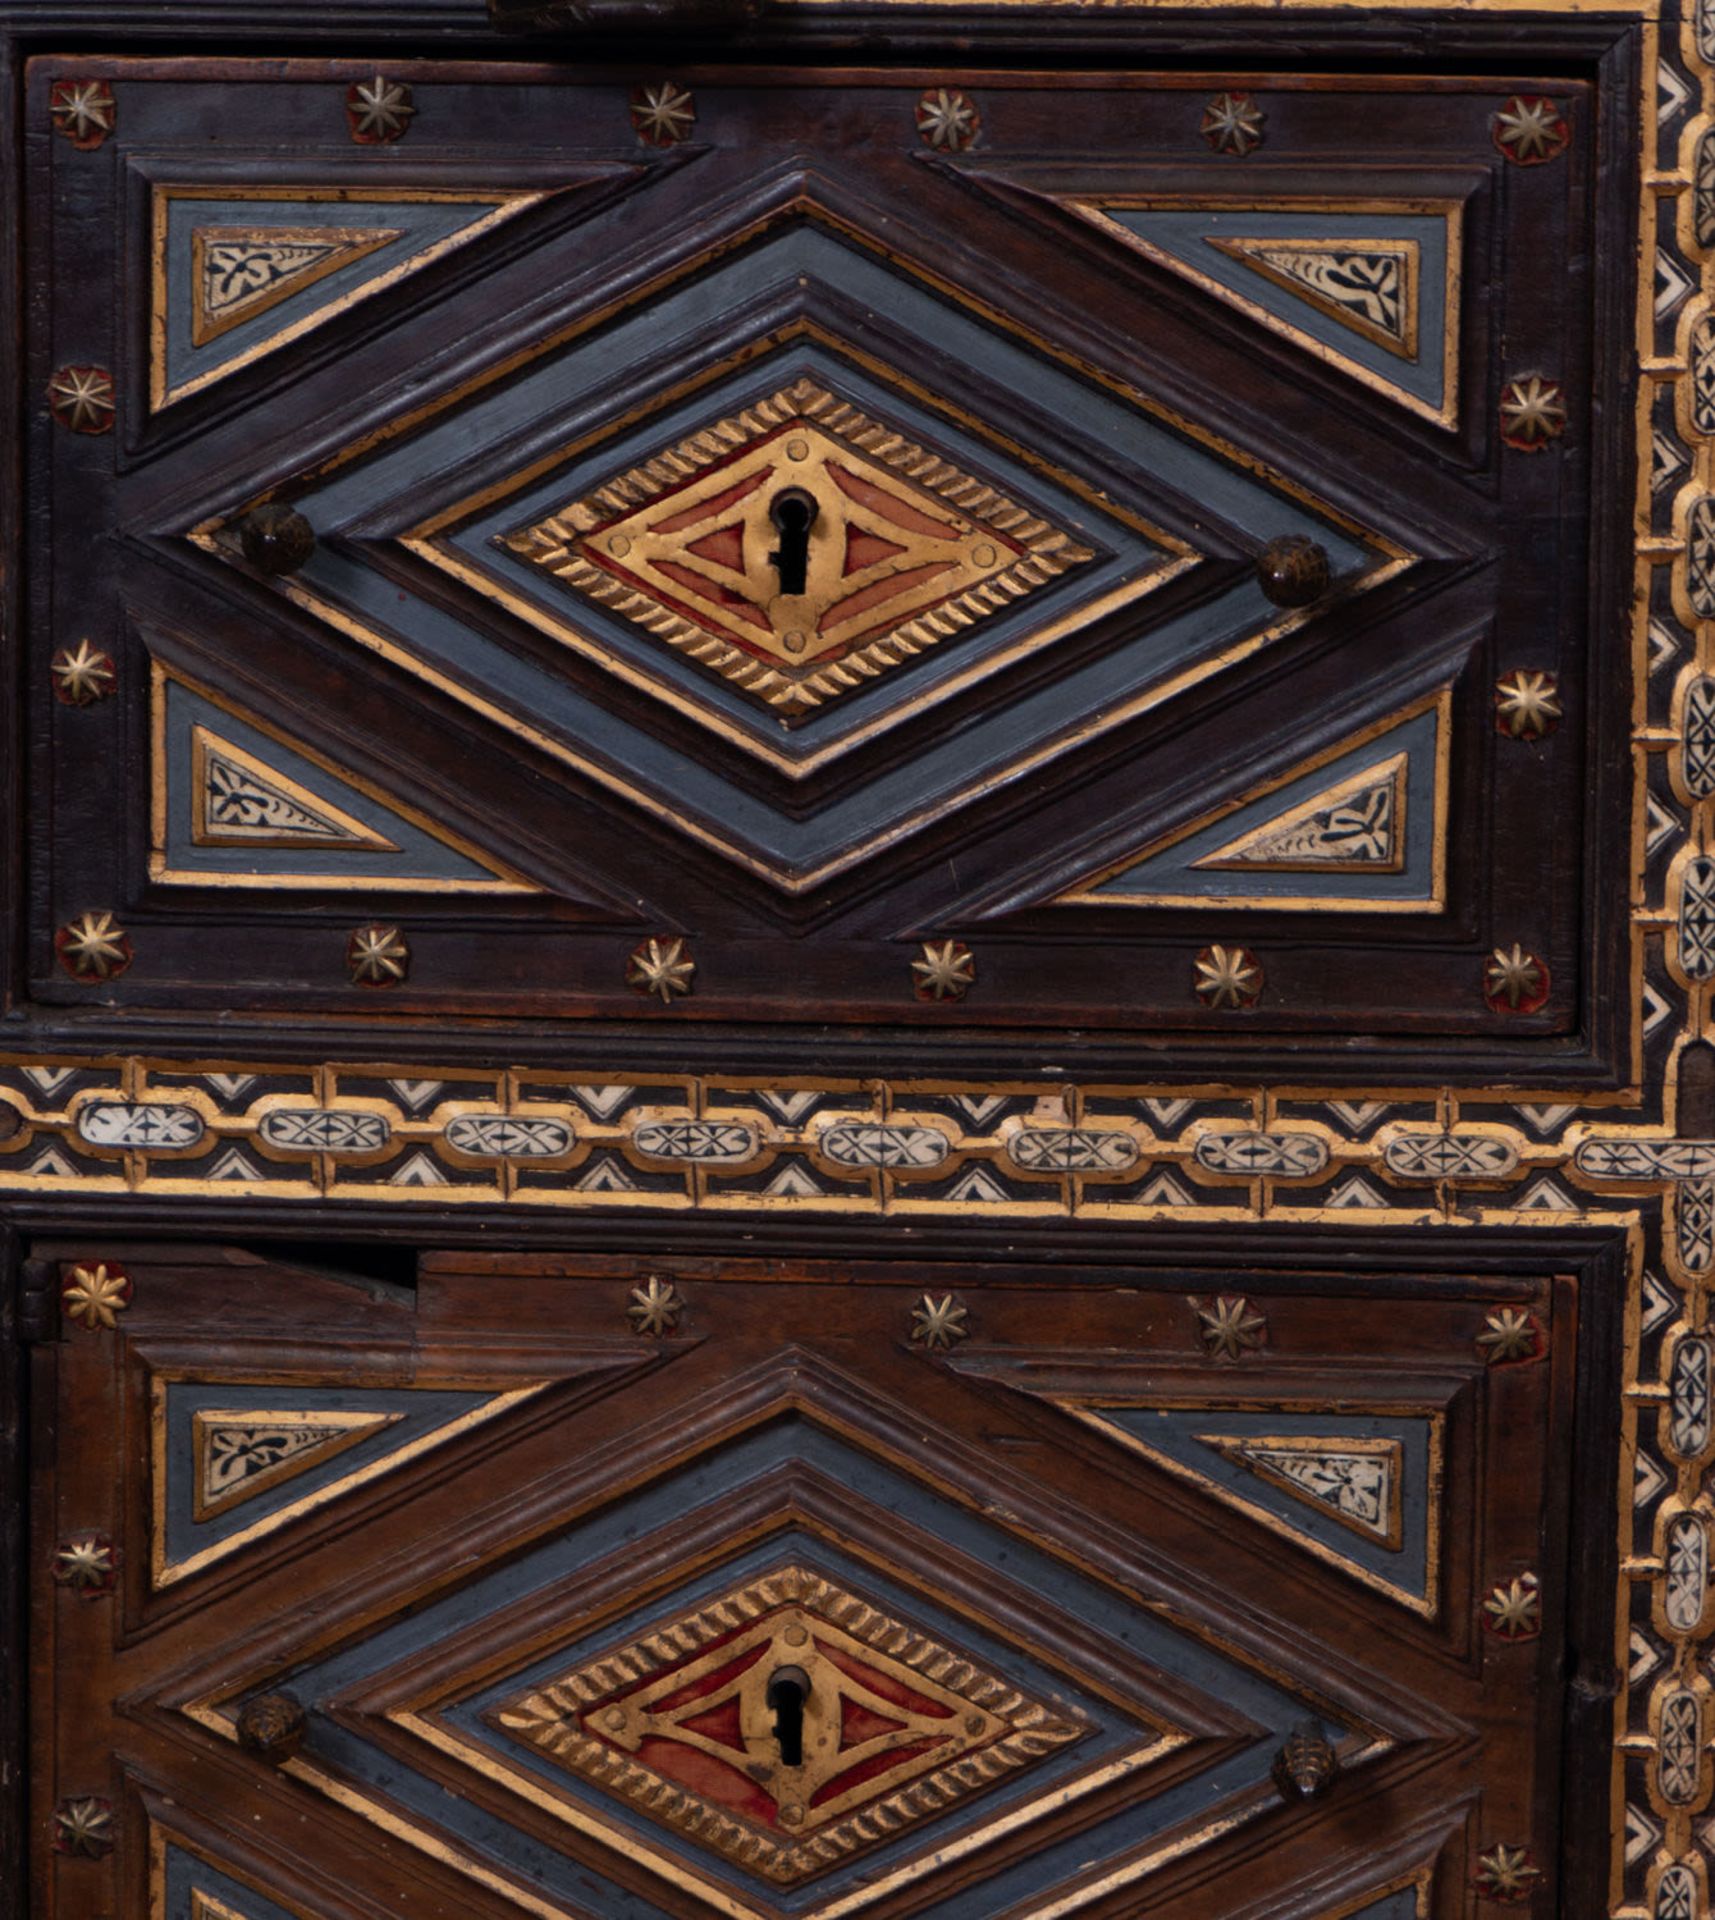 Exceptional Spanish Vargueno Cabinet complete with table, Toledo school of the 17th century - Image 20 of 26